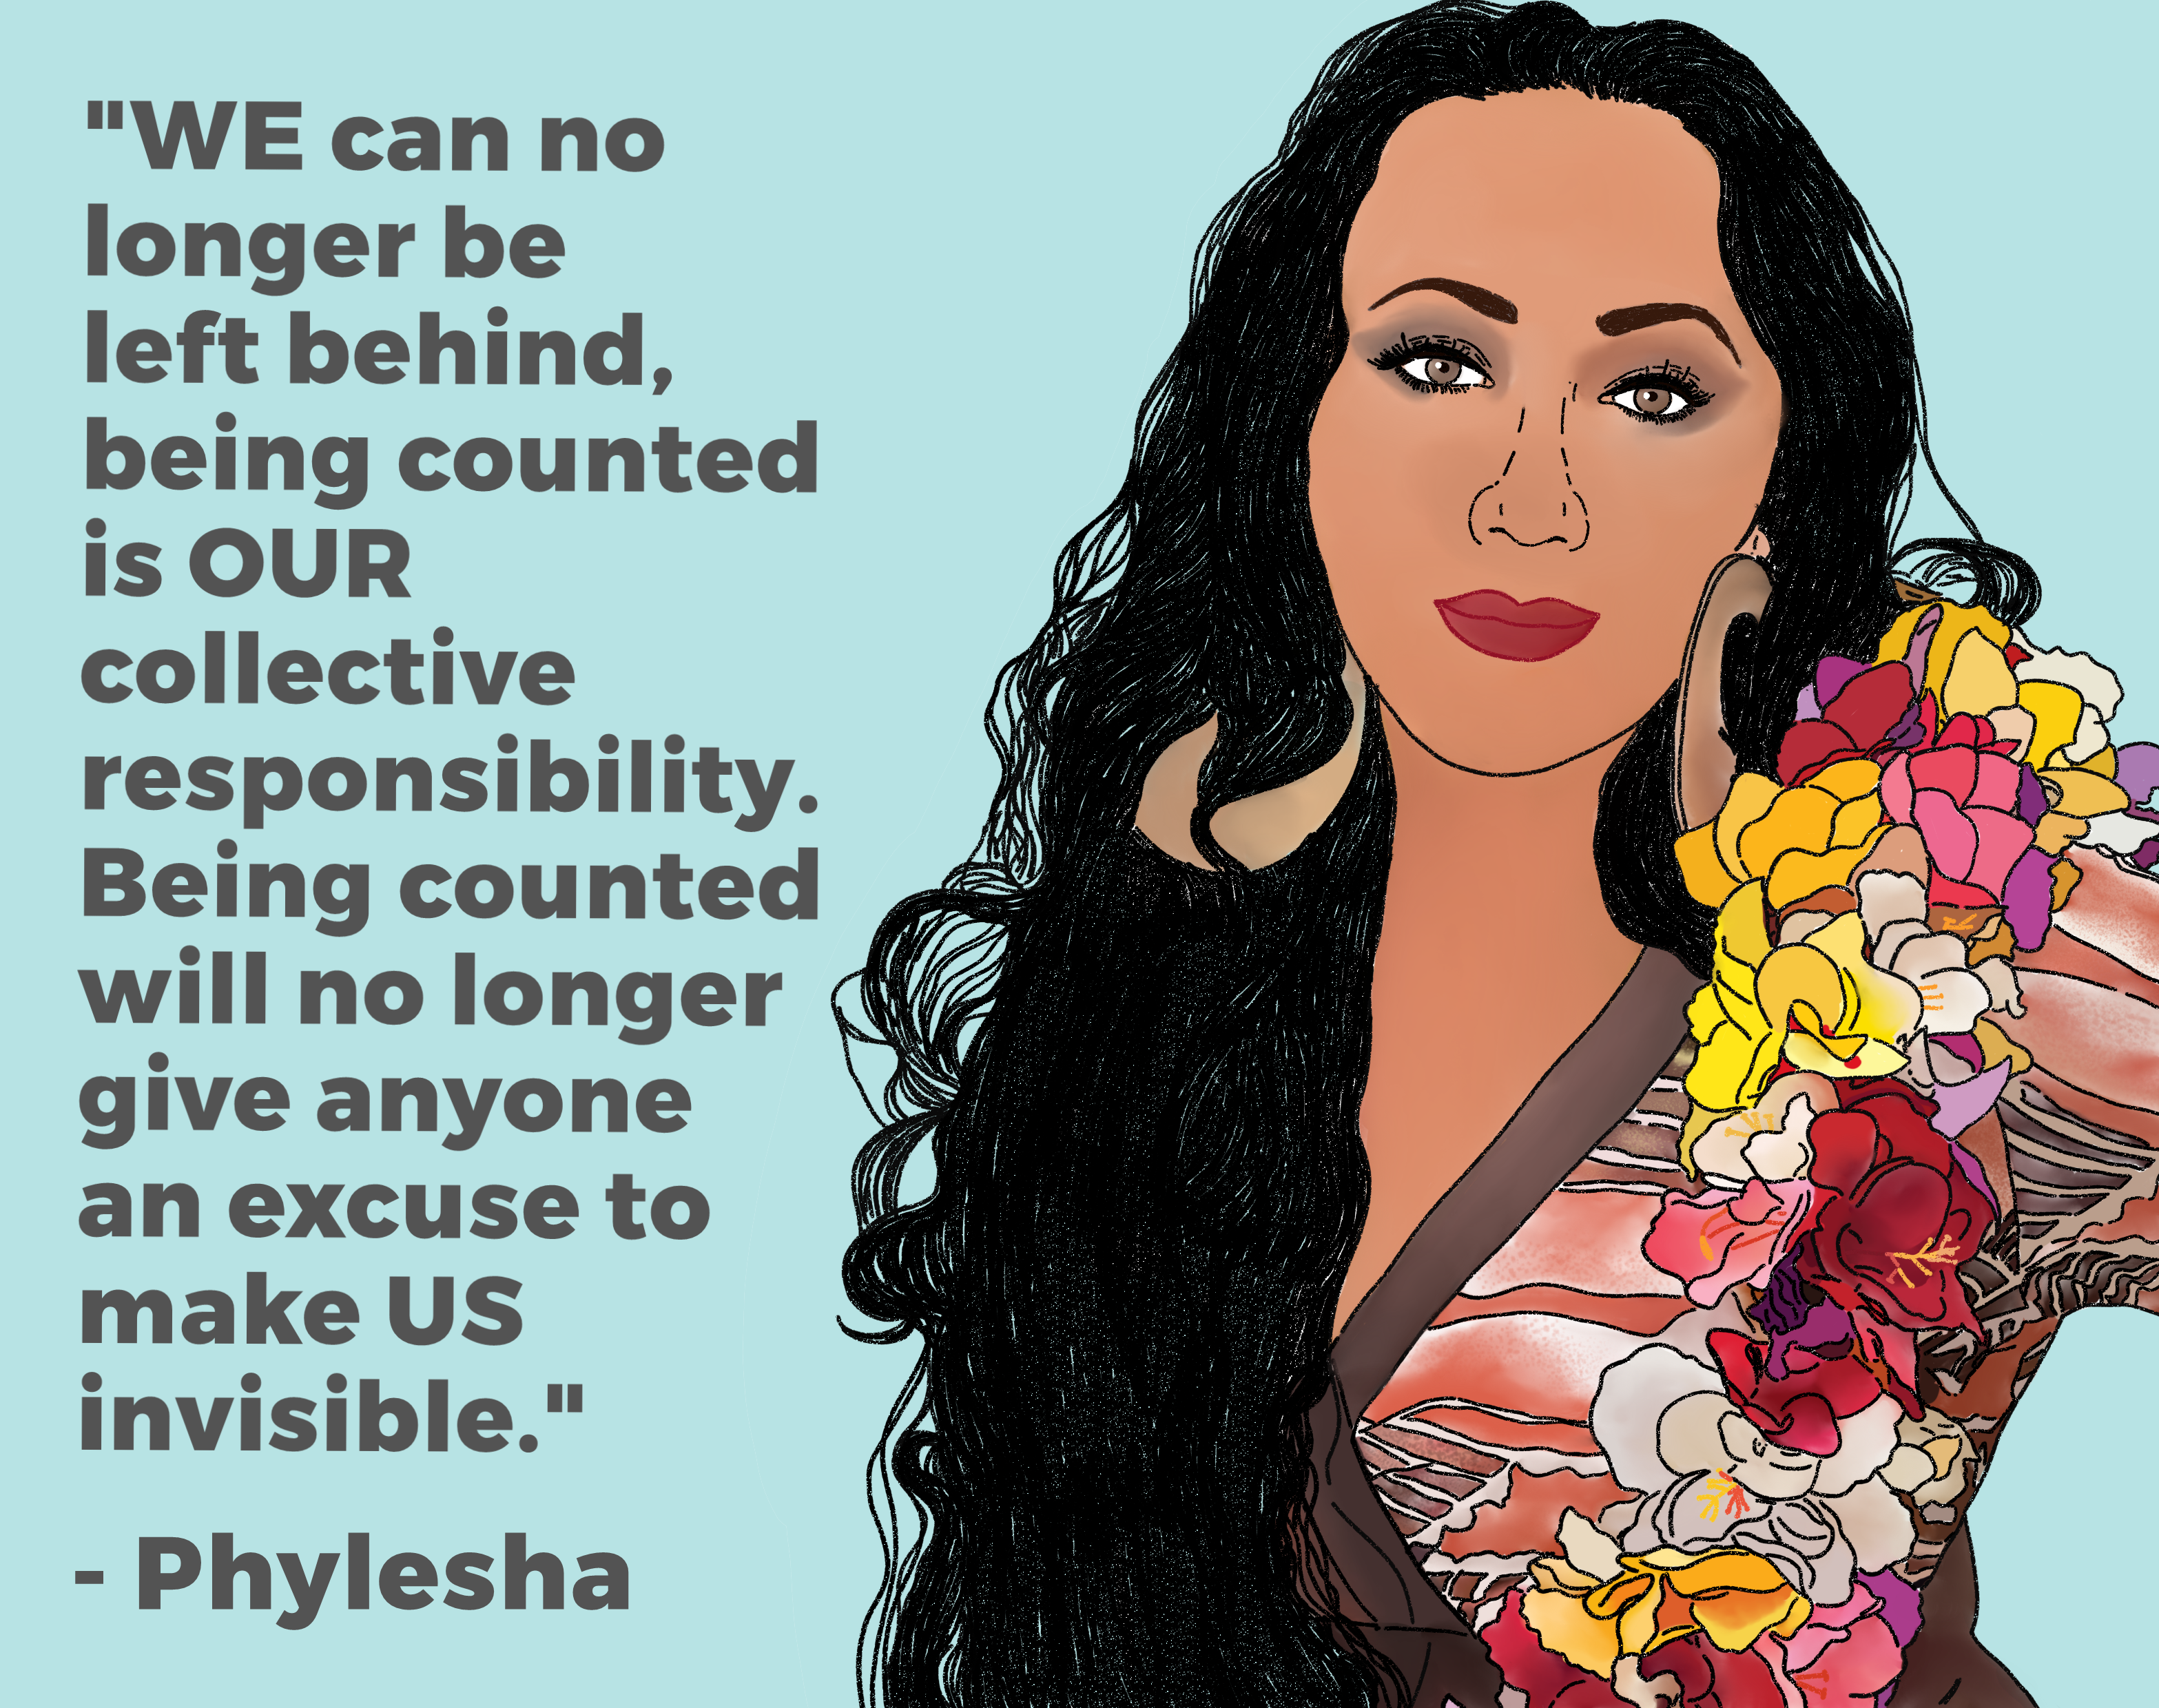 Drawing of Phylehsa saying “WE can no longer be left behind, being counted is OUR collective responsibility. Being counted will no longer give anyone an excuse to make US invisible”.